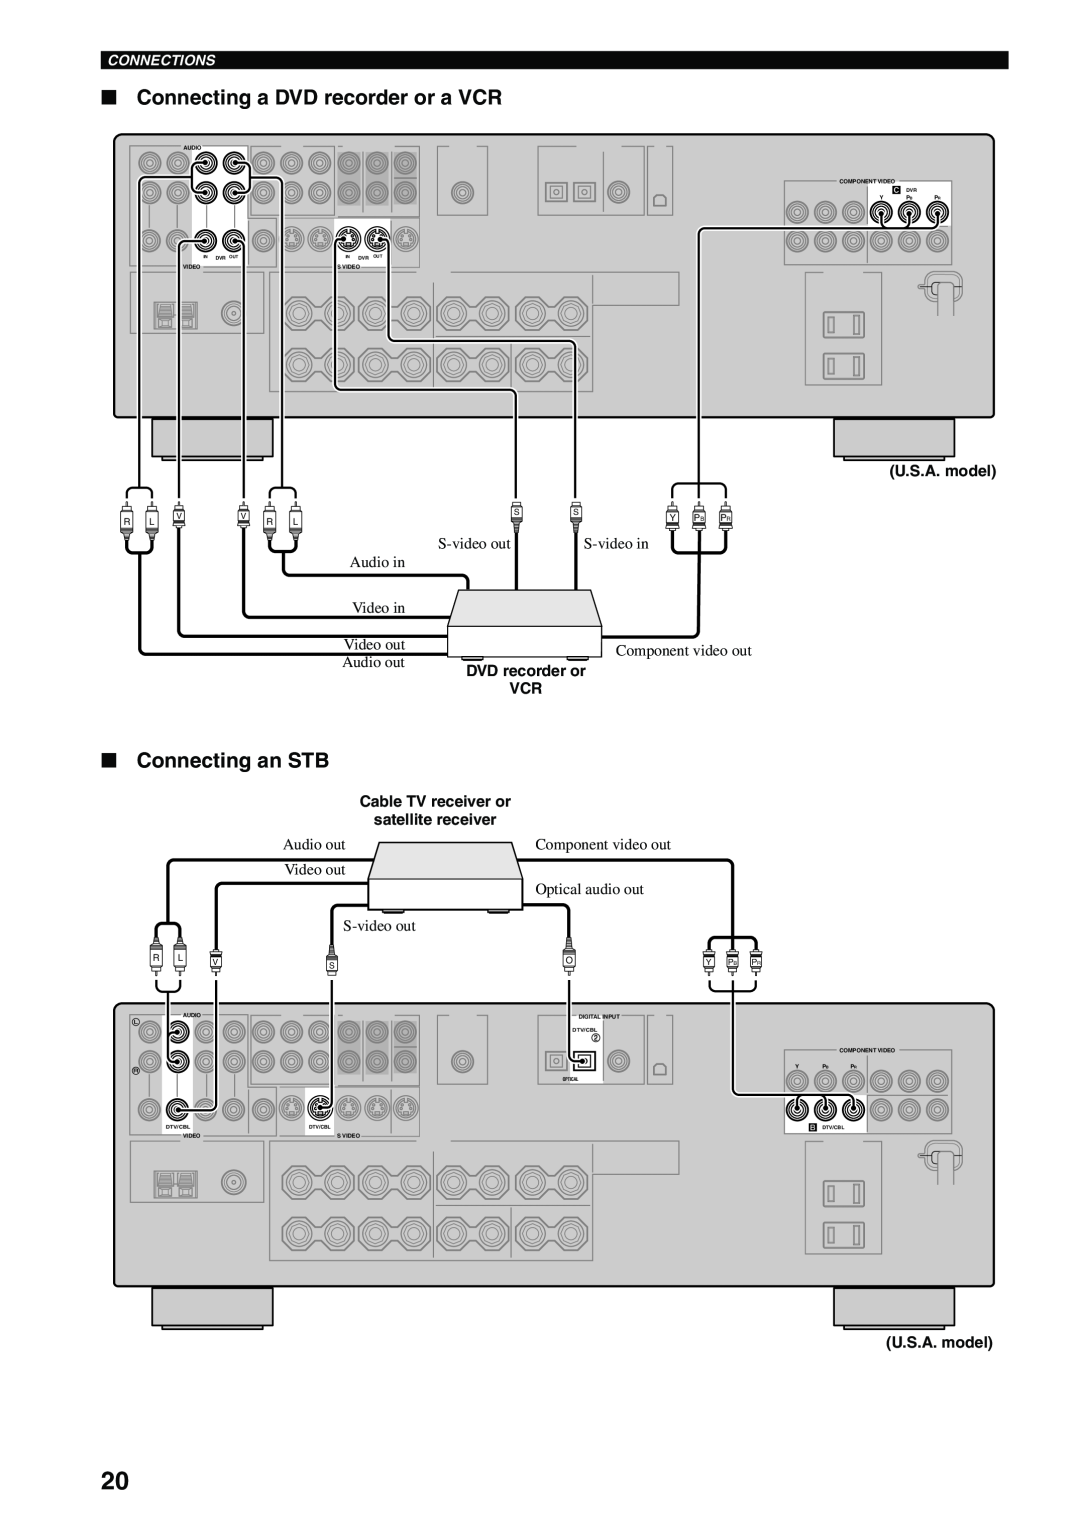 Yamaha HTR-5940 AV owner manual Connecting a DVD recorder or a VCR, Connecting an STB, U.S.A. model, Connections, Y Pb 